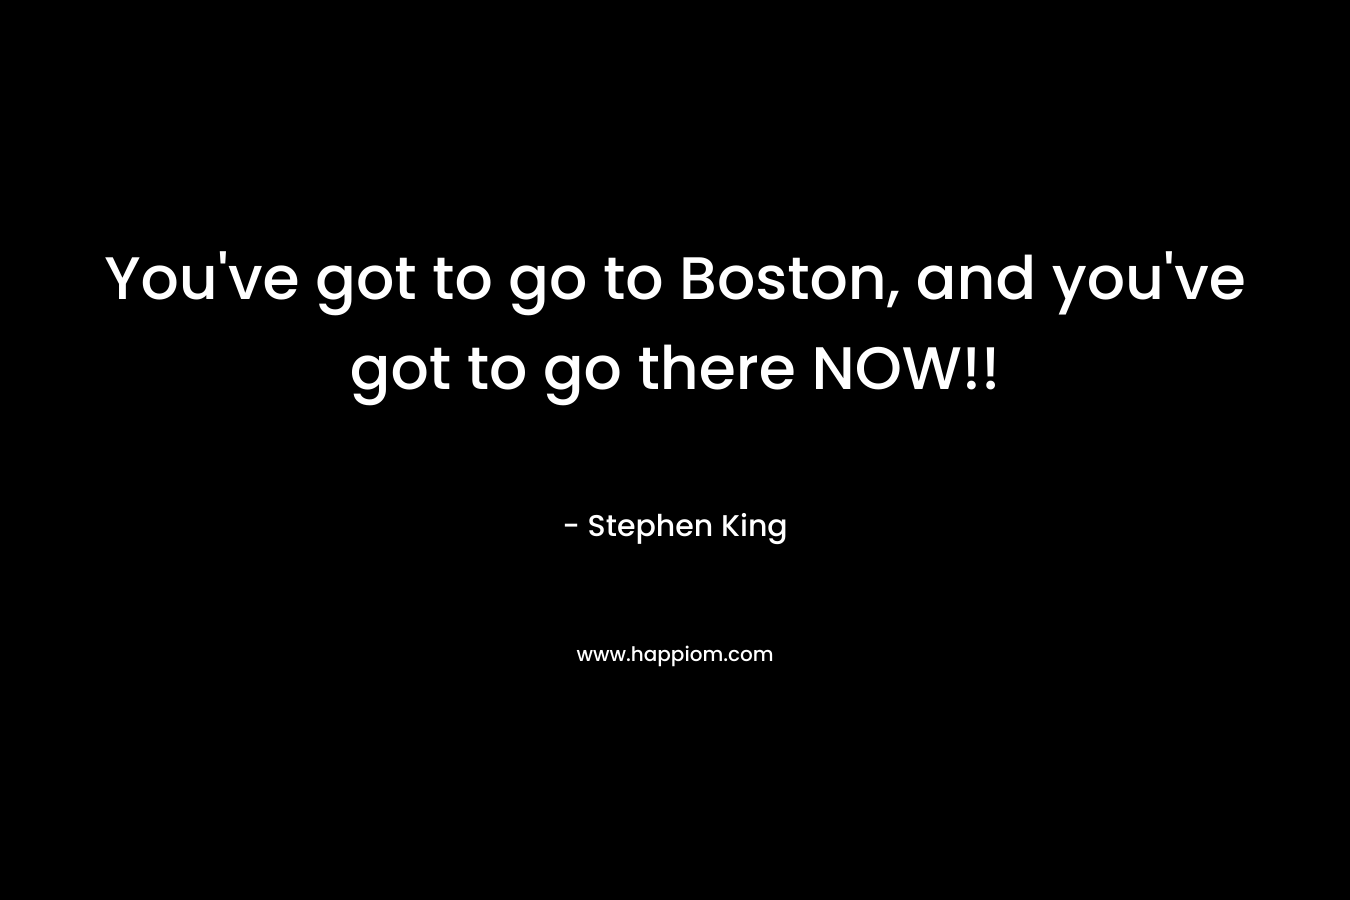 You've got to go to Boston, and you've got to go there NOW!!